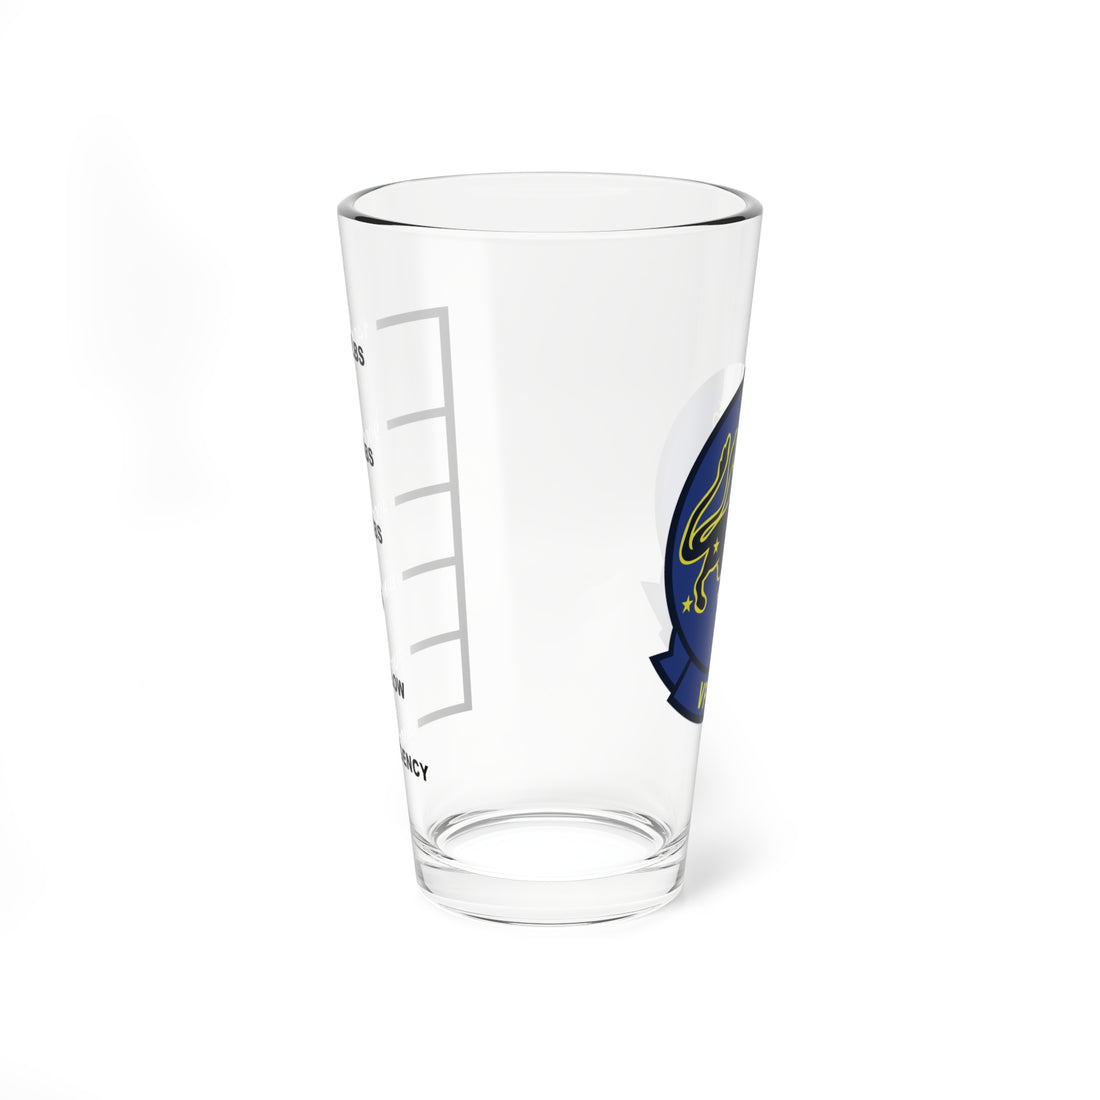 VFA-213 "Blacklions" Fuel Low Pint Glass, Navy Strike Fighter Squadron flying the F/A-18 Hornet